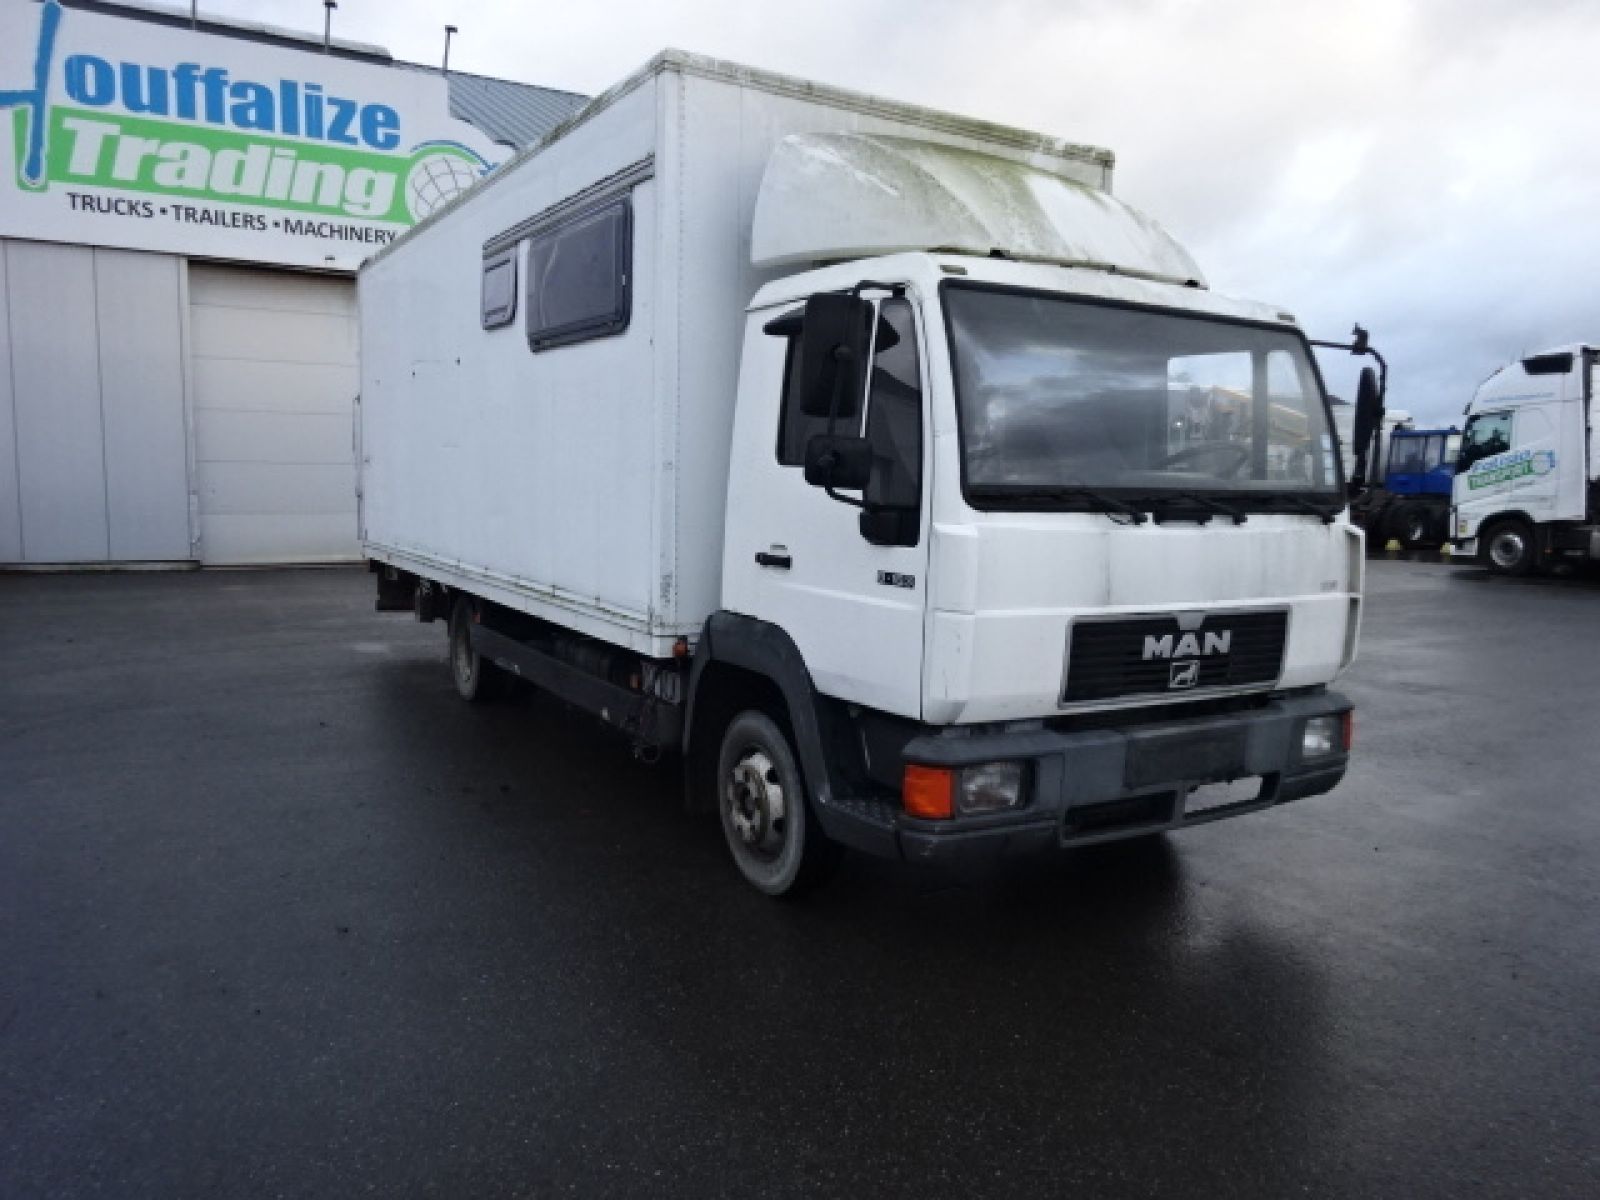 Second hand sale Truck units - MAN 9.163  CAMION FOURGON (Belgique - Europe) - Houffalize Trading s.a.